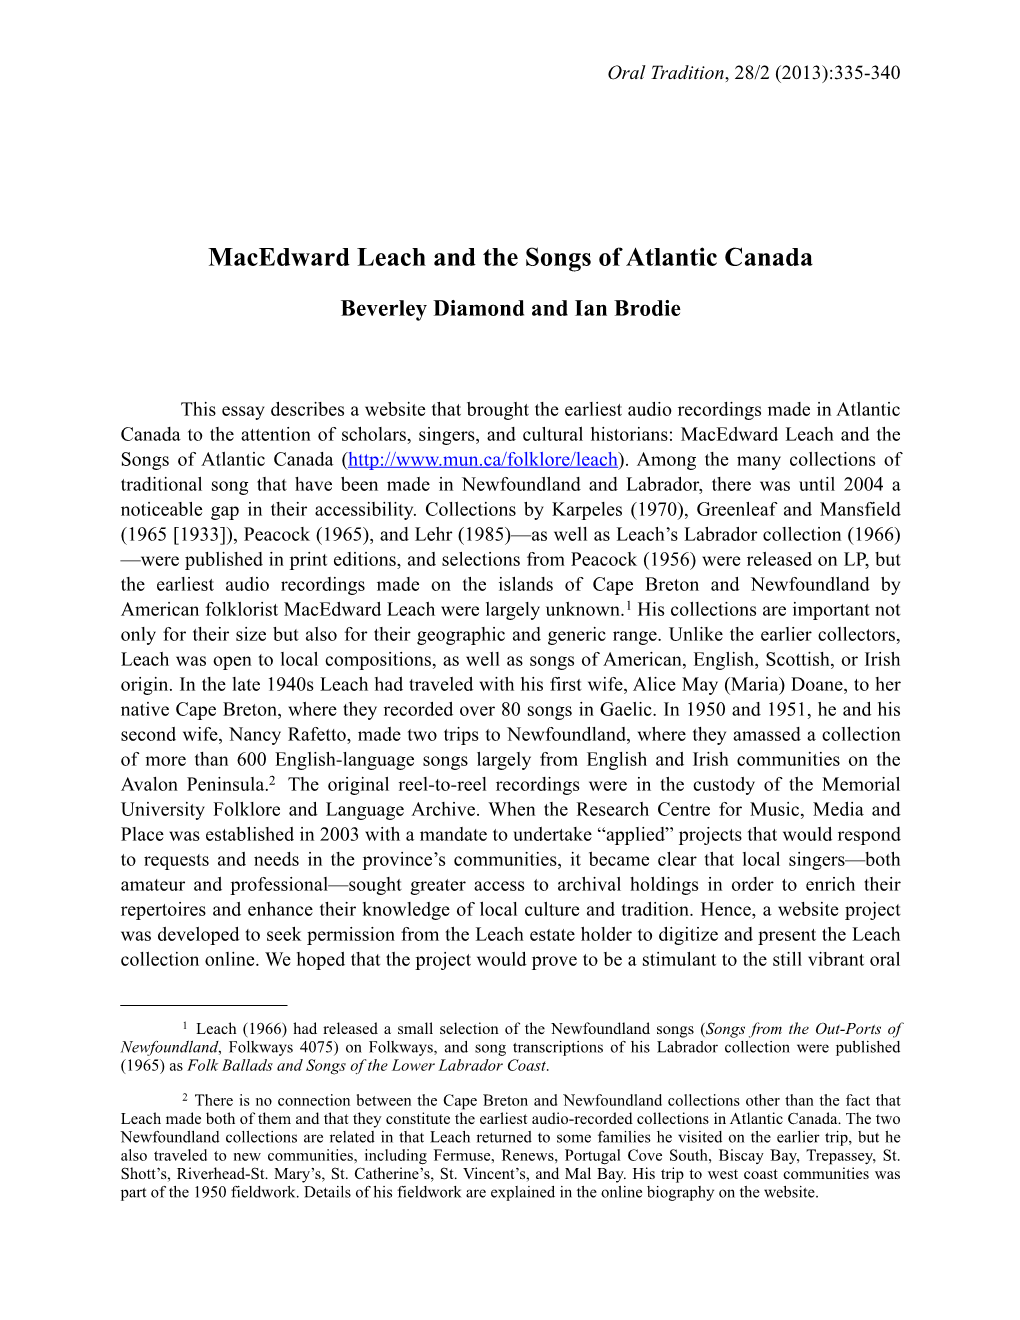 Macedward Leach and the Songs of Atlantic Canada